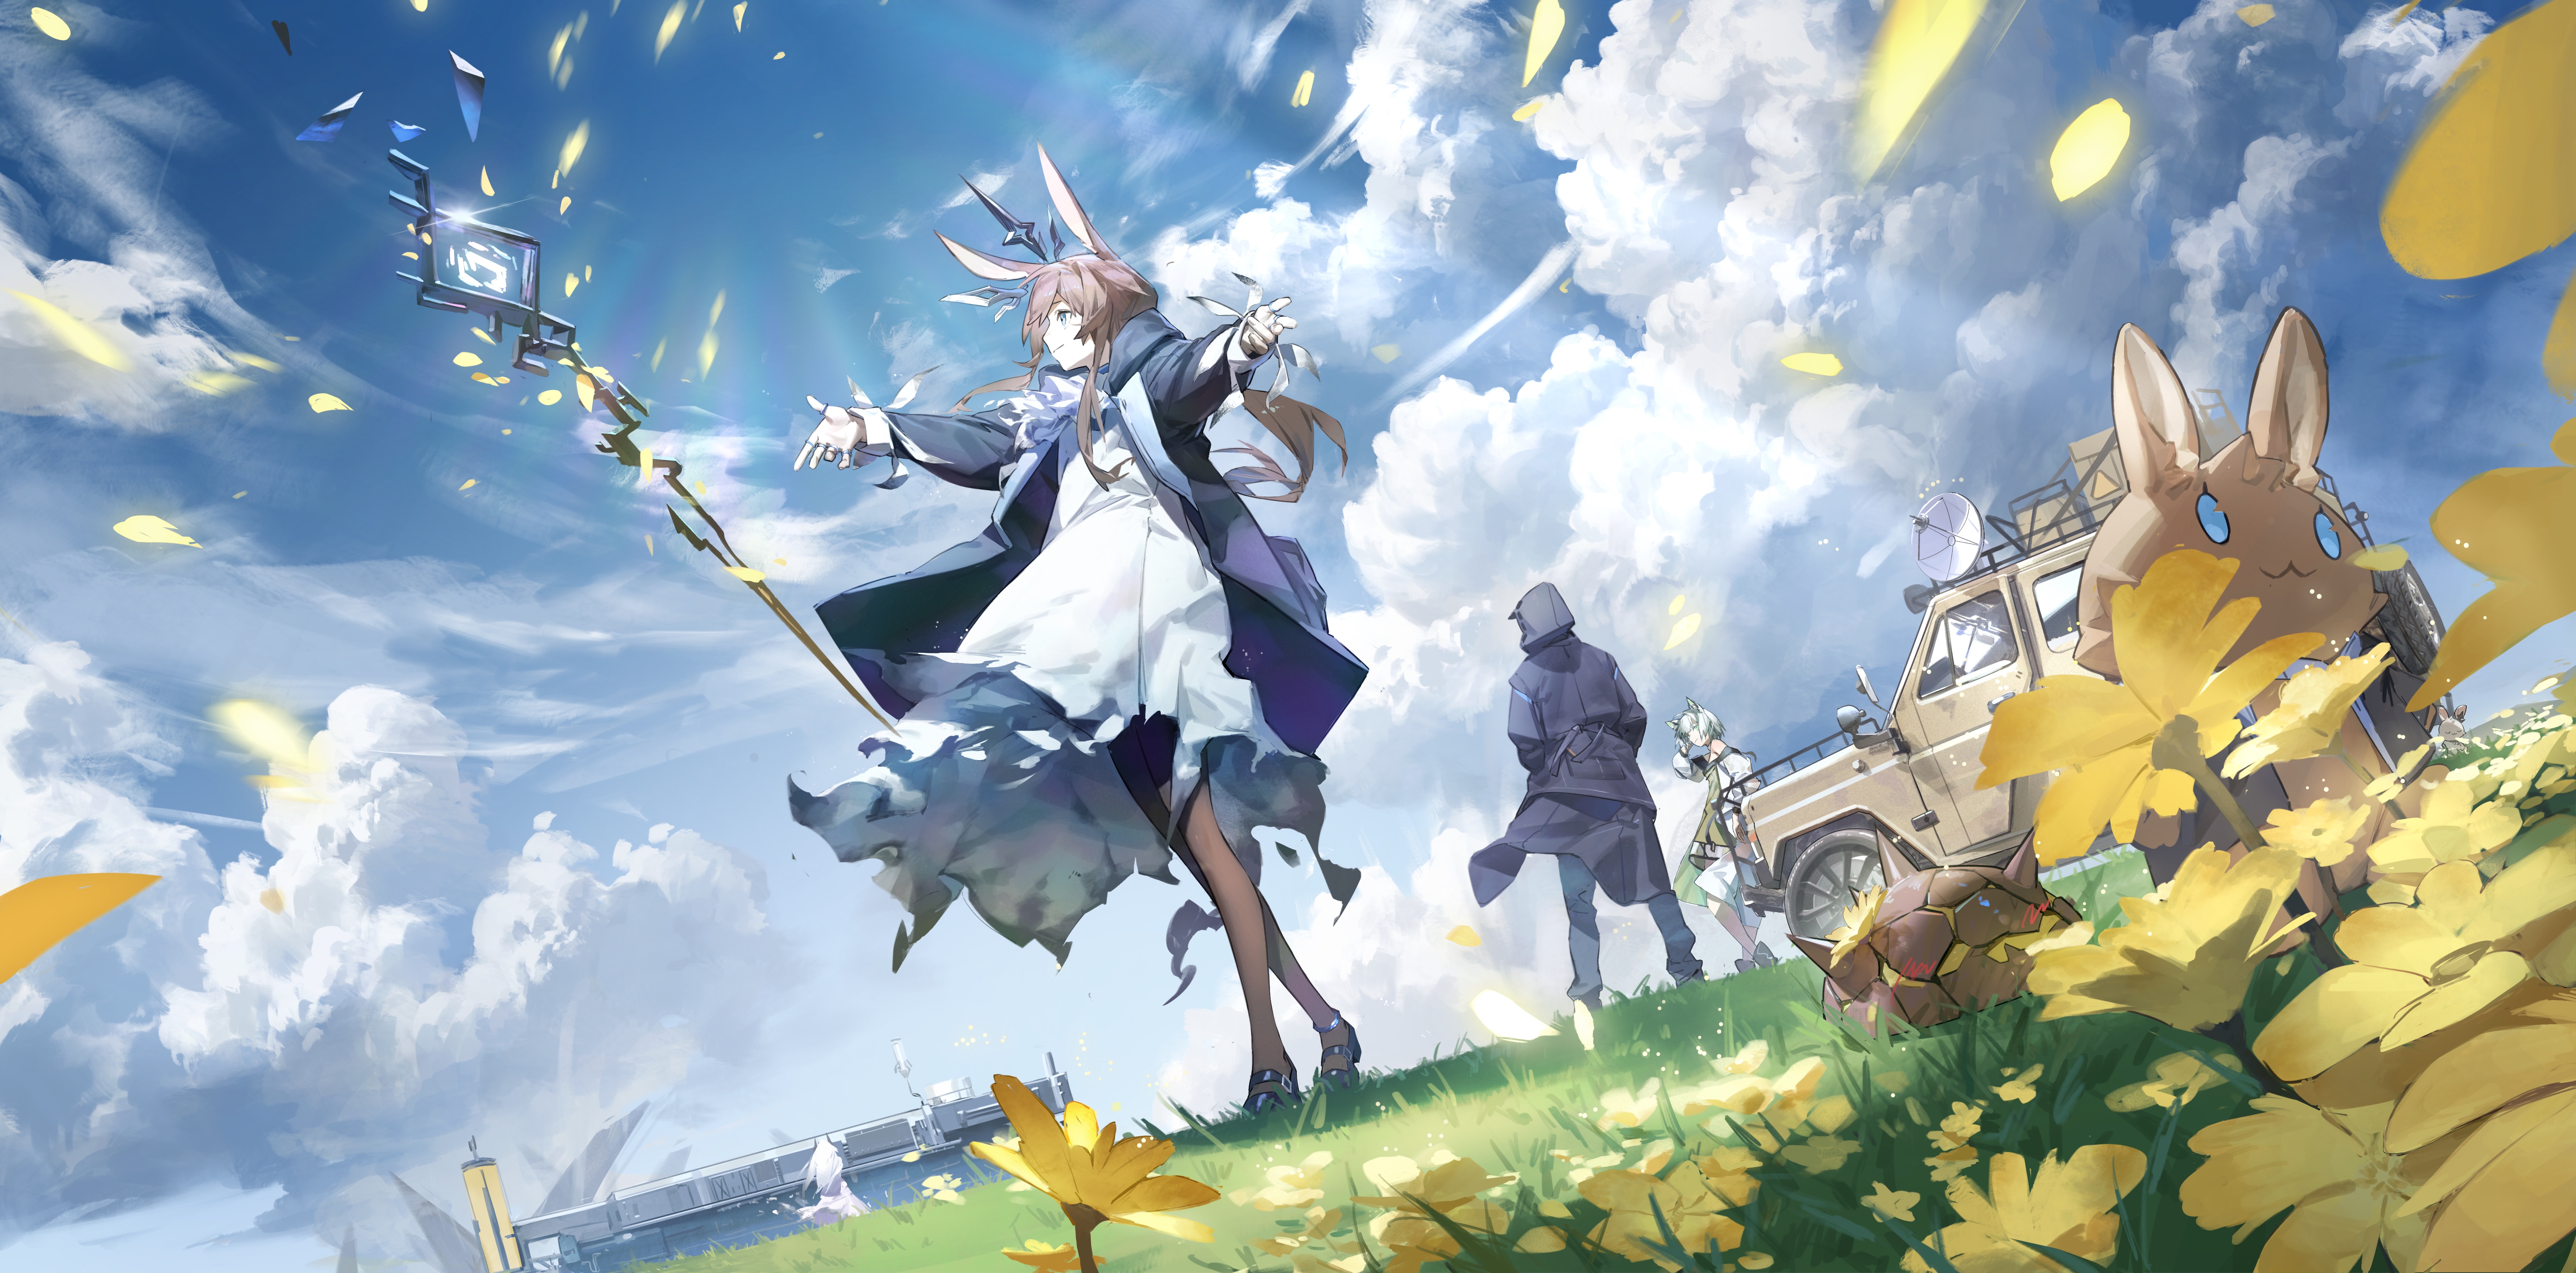 Anime 7142x3530 Arknights animal ears Amiya (Arknights) clouds Doctor(Arknights) coats Kal'tsit (Arknights) grass low-angle group of people flowers sky car yellow flowers cumulus